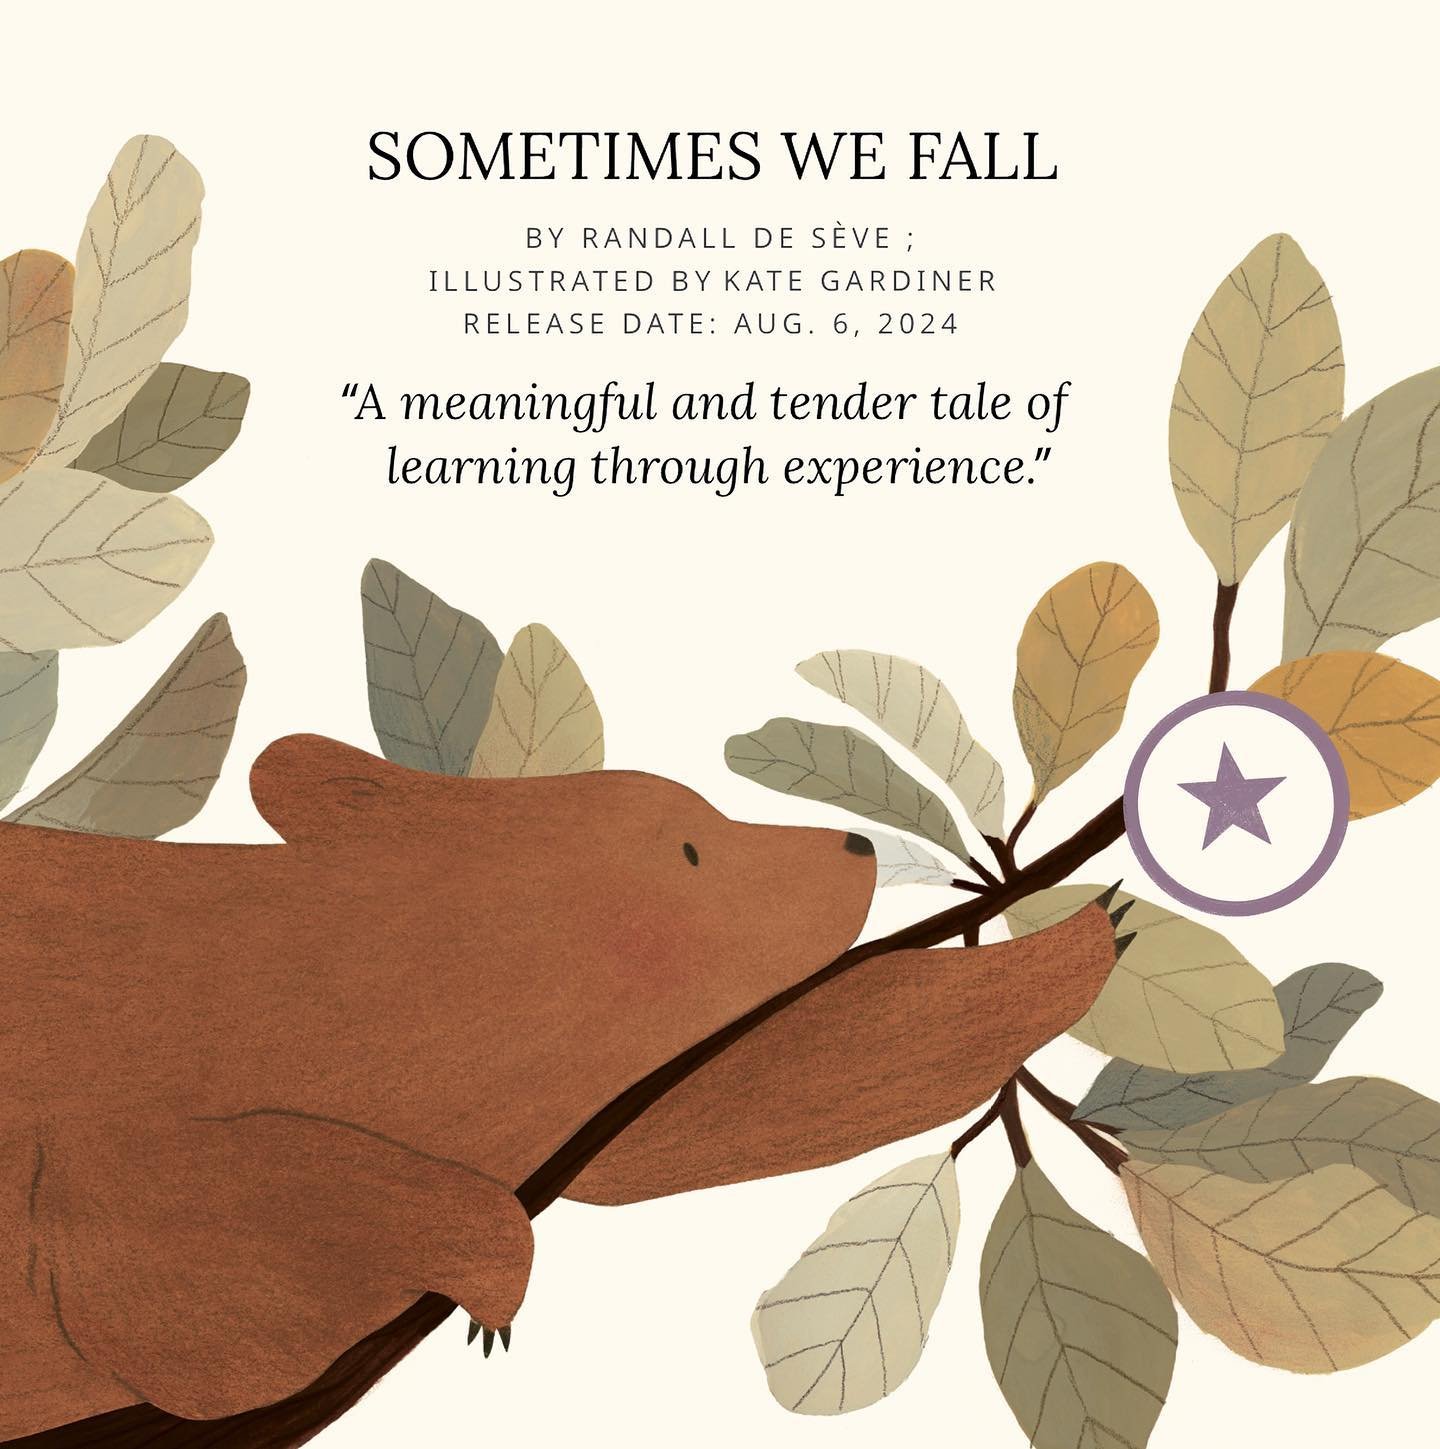 &ldquo;Sometimes We Fall&rdquo; received a Kirkus star! ⭐️ Thank you @kirkus_reviews for the lovely review. To read the full review, click the link in my bio (: &ldquo;Sometimes we Fall&rdquo; written by the very talented @rdeseve is available for pr